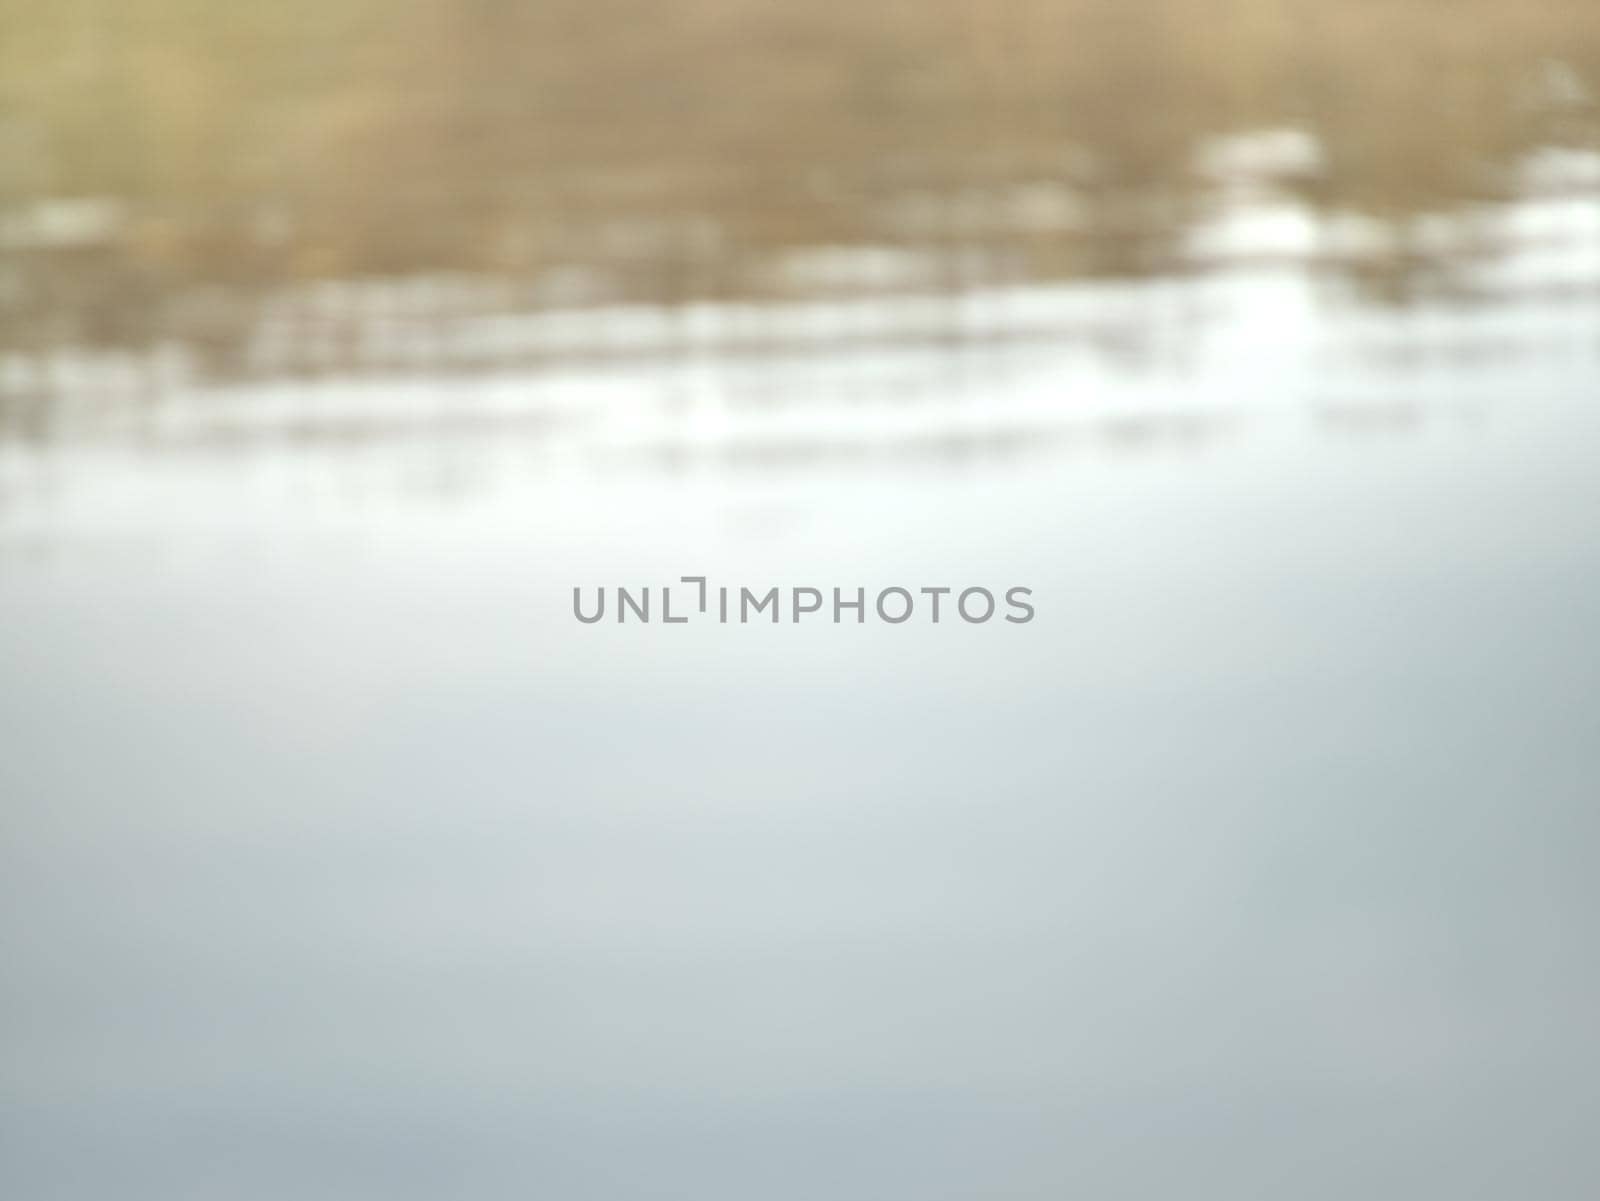 Lake water is mirroring forest on oposit bank. Romantic abstract blurry view to water level.